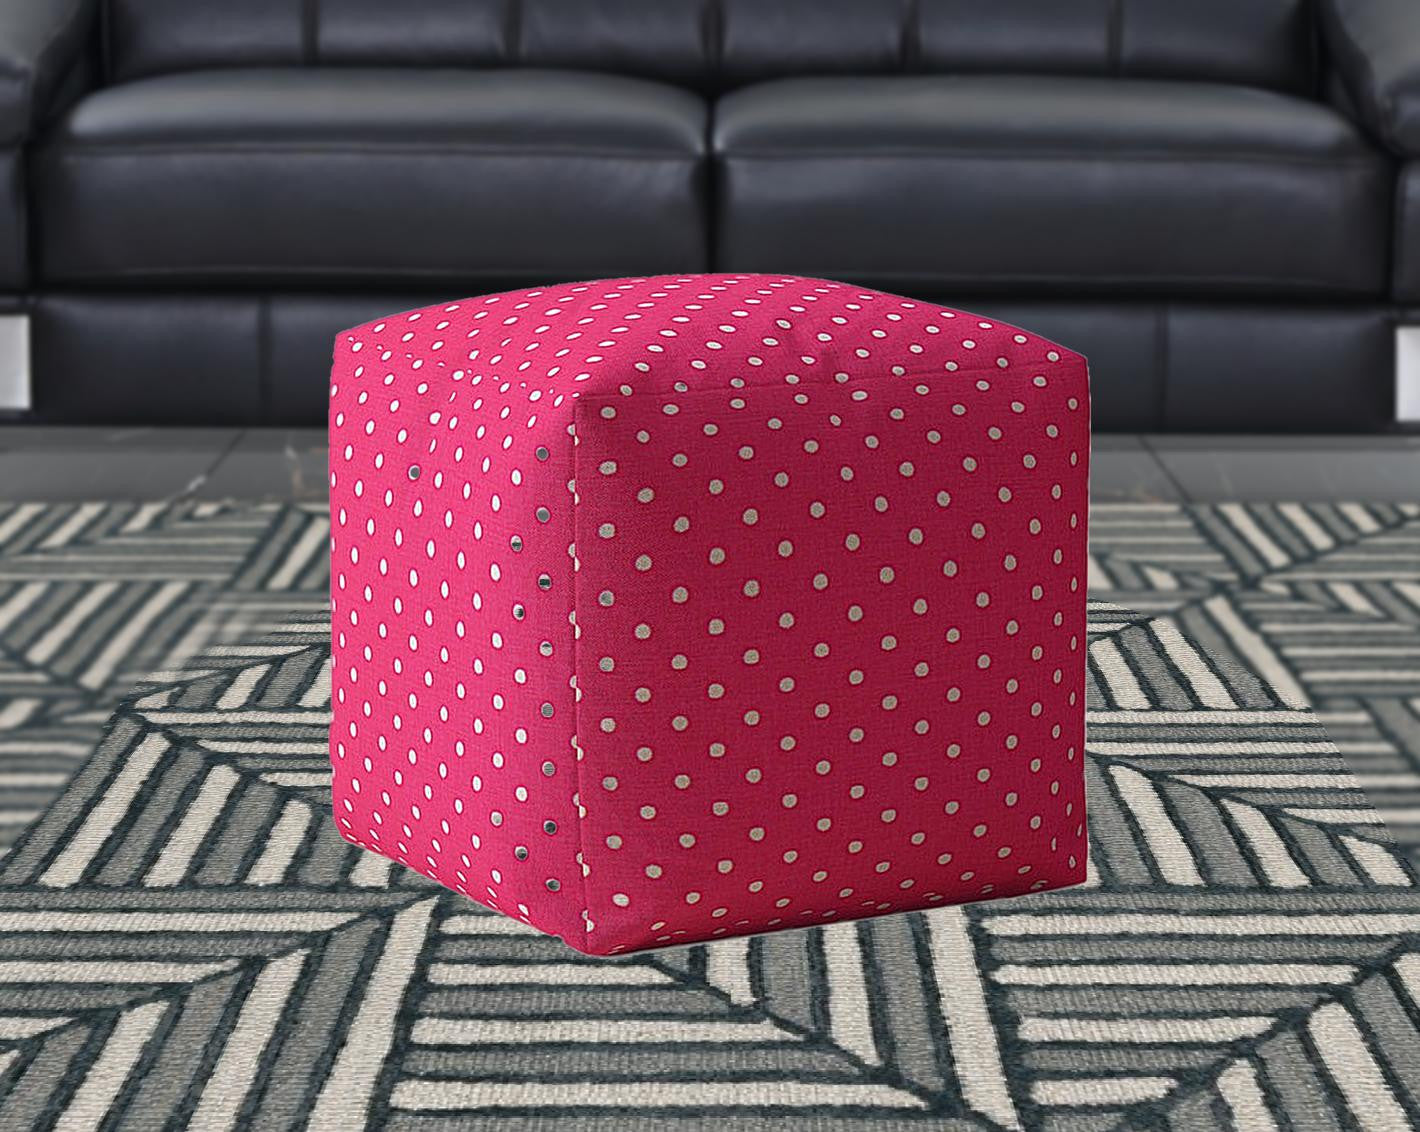 17" Pink And White Cotton Polka Dots Pouf Cover